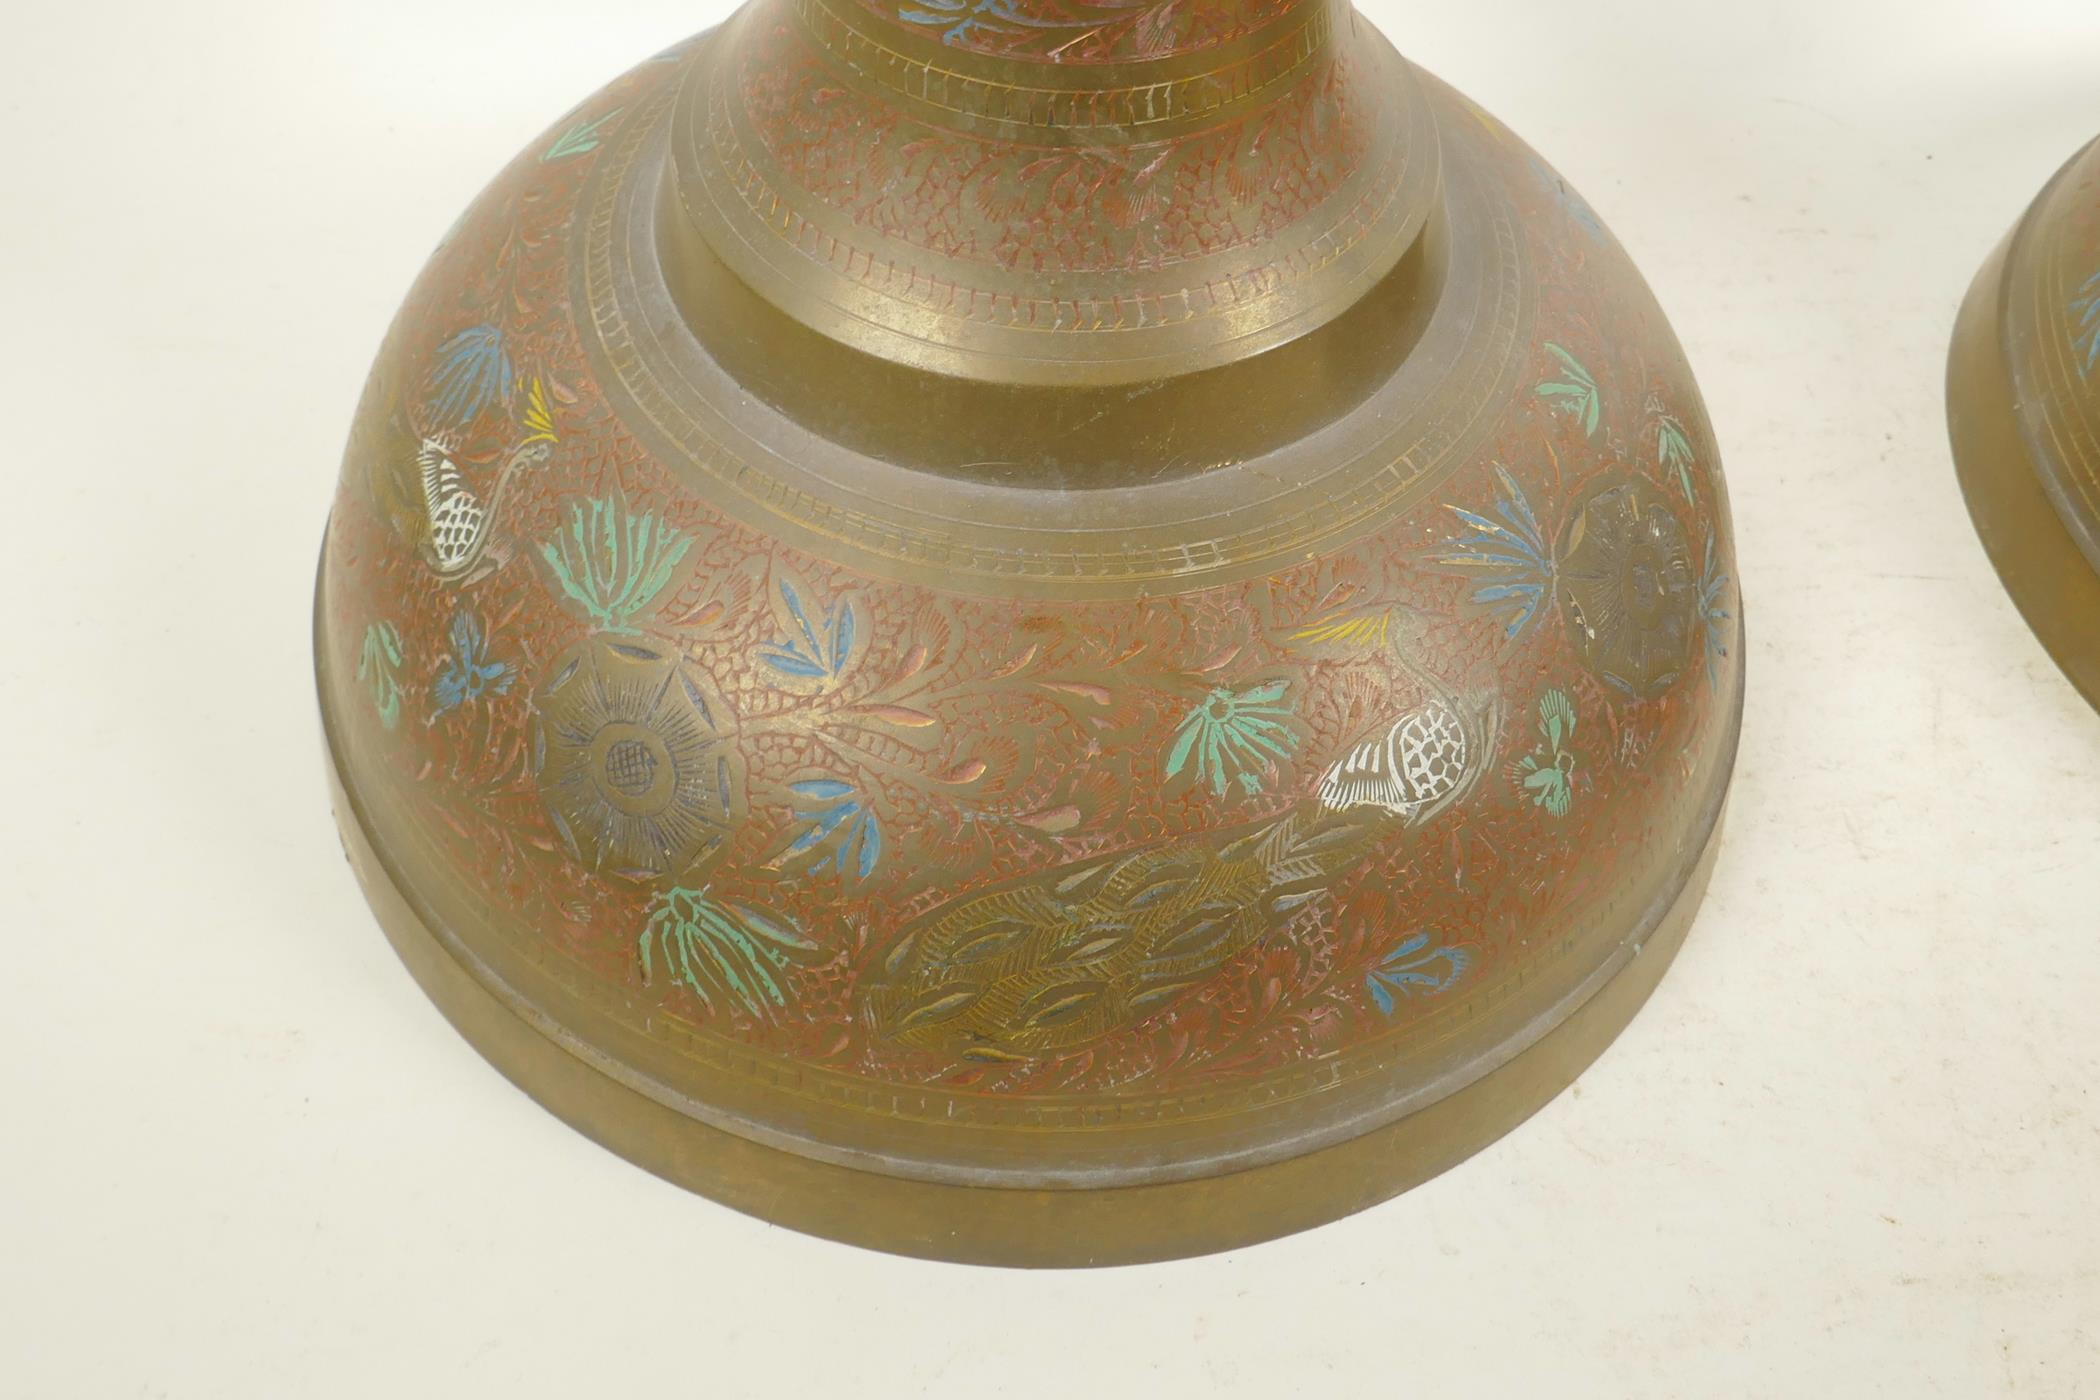 A pair of large Indian brass floor vases with engraved and painted decoration depicting peacocks, - Image 6 of 9